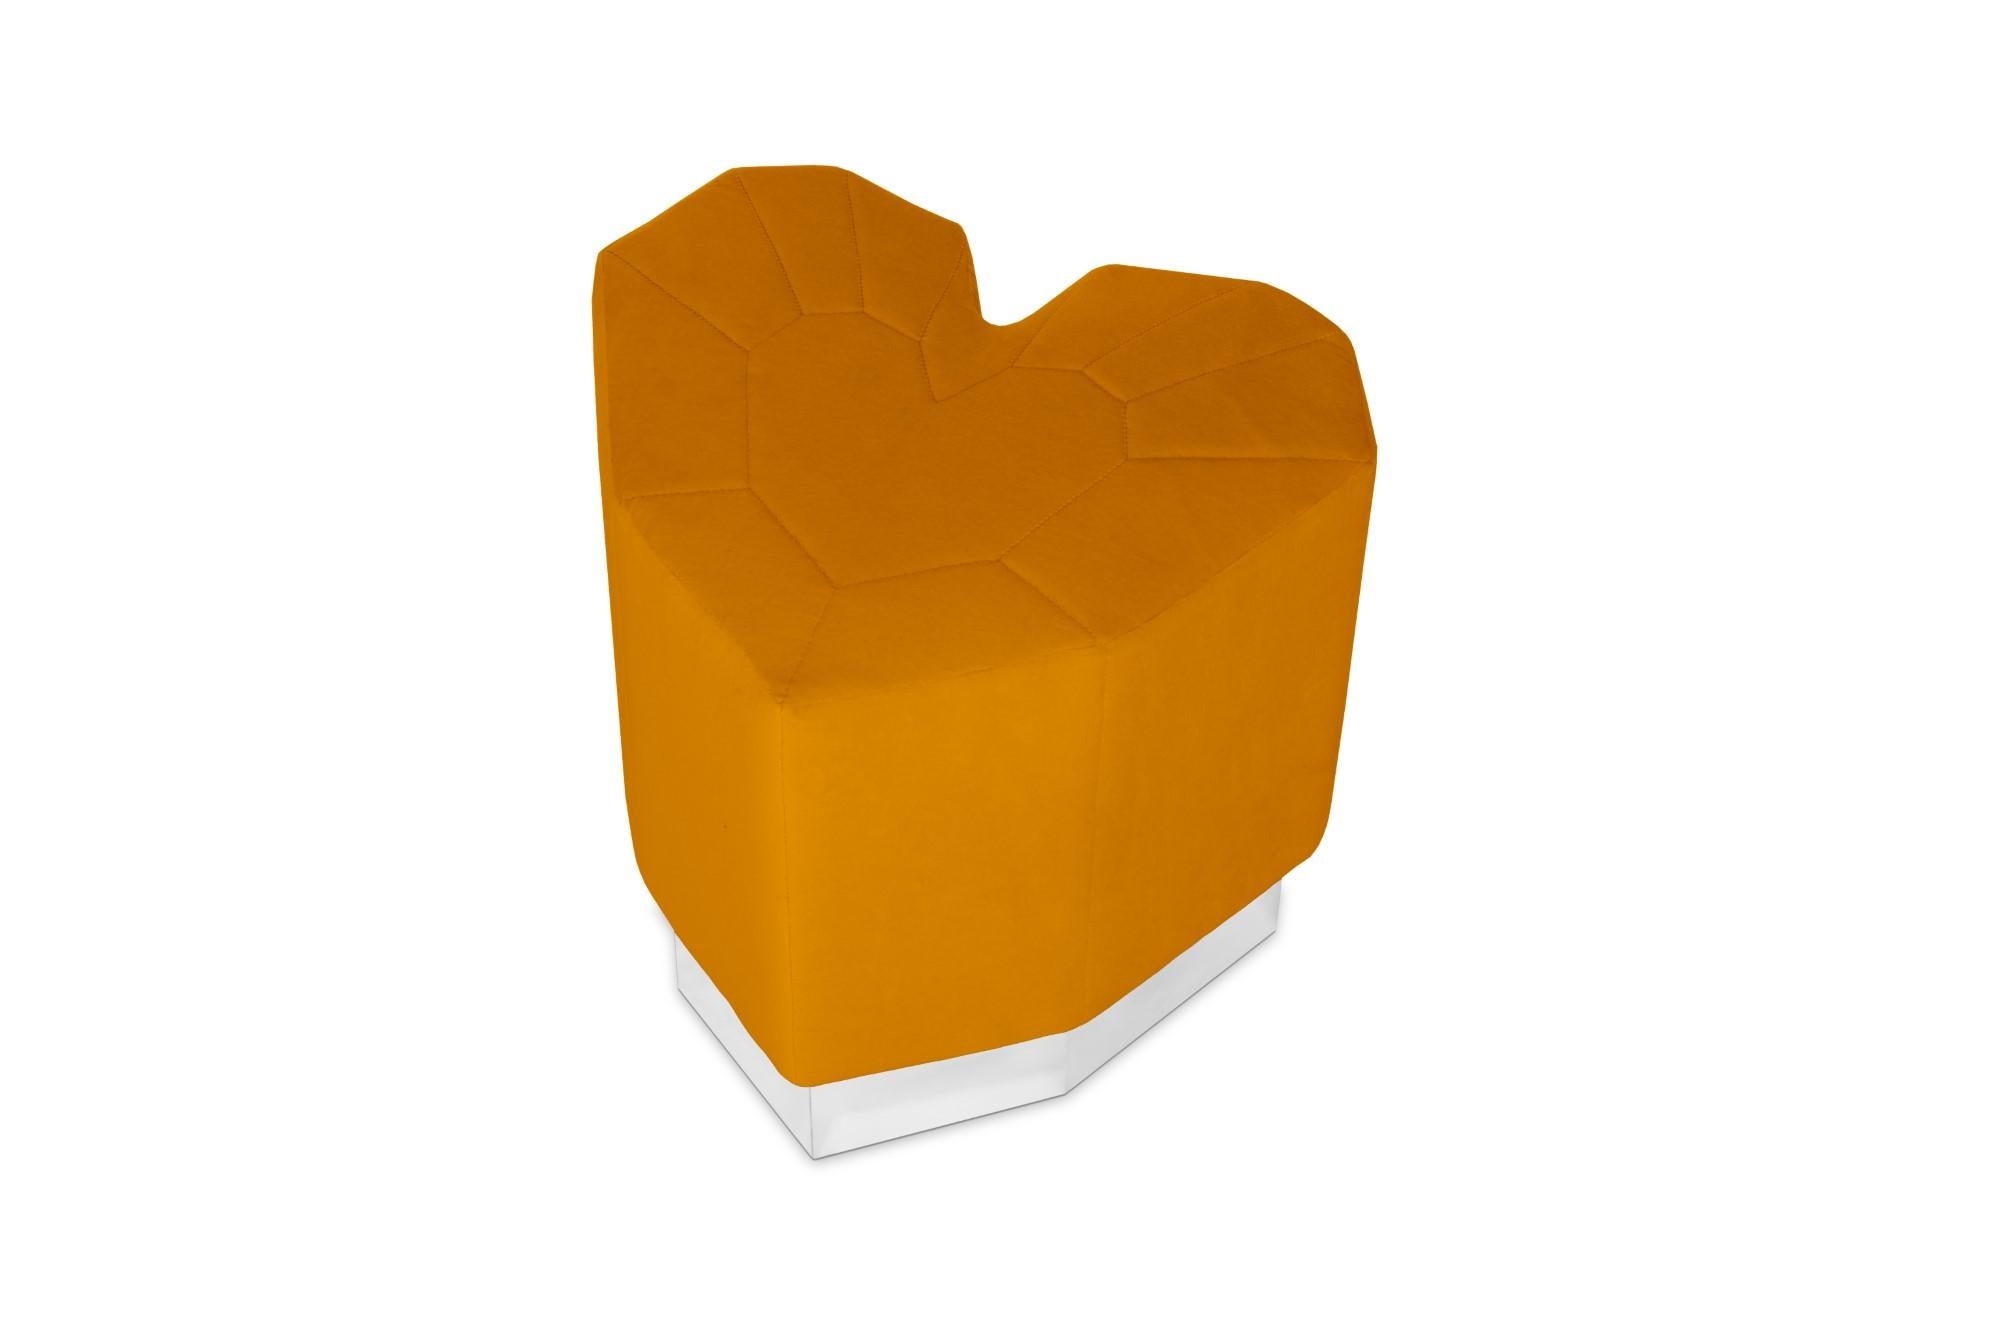 Queen heart Varese Ochre stool by Royal Stranger
Dimensions: D 44 x W 49 x H 49 cm.
Different upholstery colors and finishes are available. Brass, copper or stainless steel in polished or brushed finish.
Materials: heart shape upholstery on top